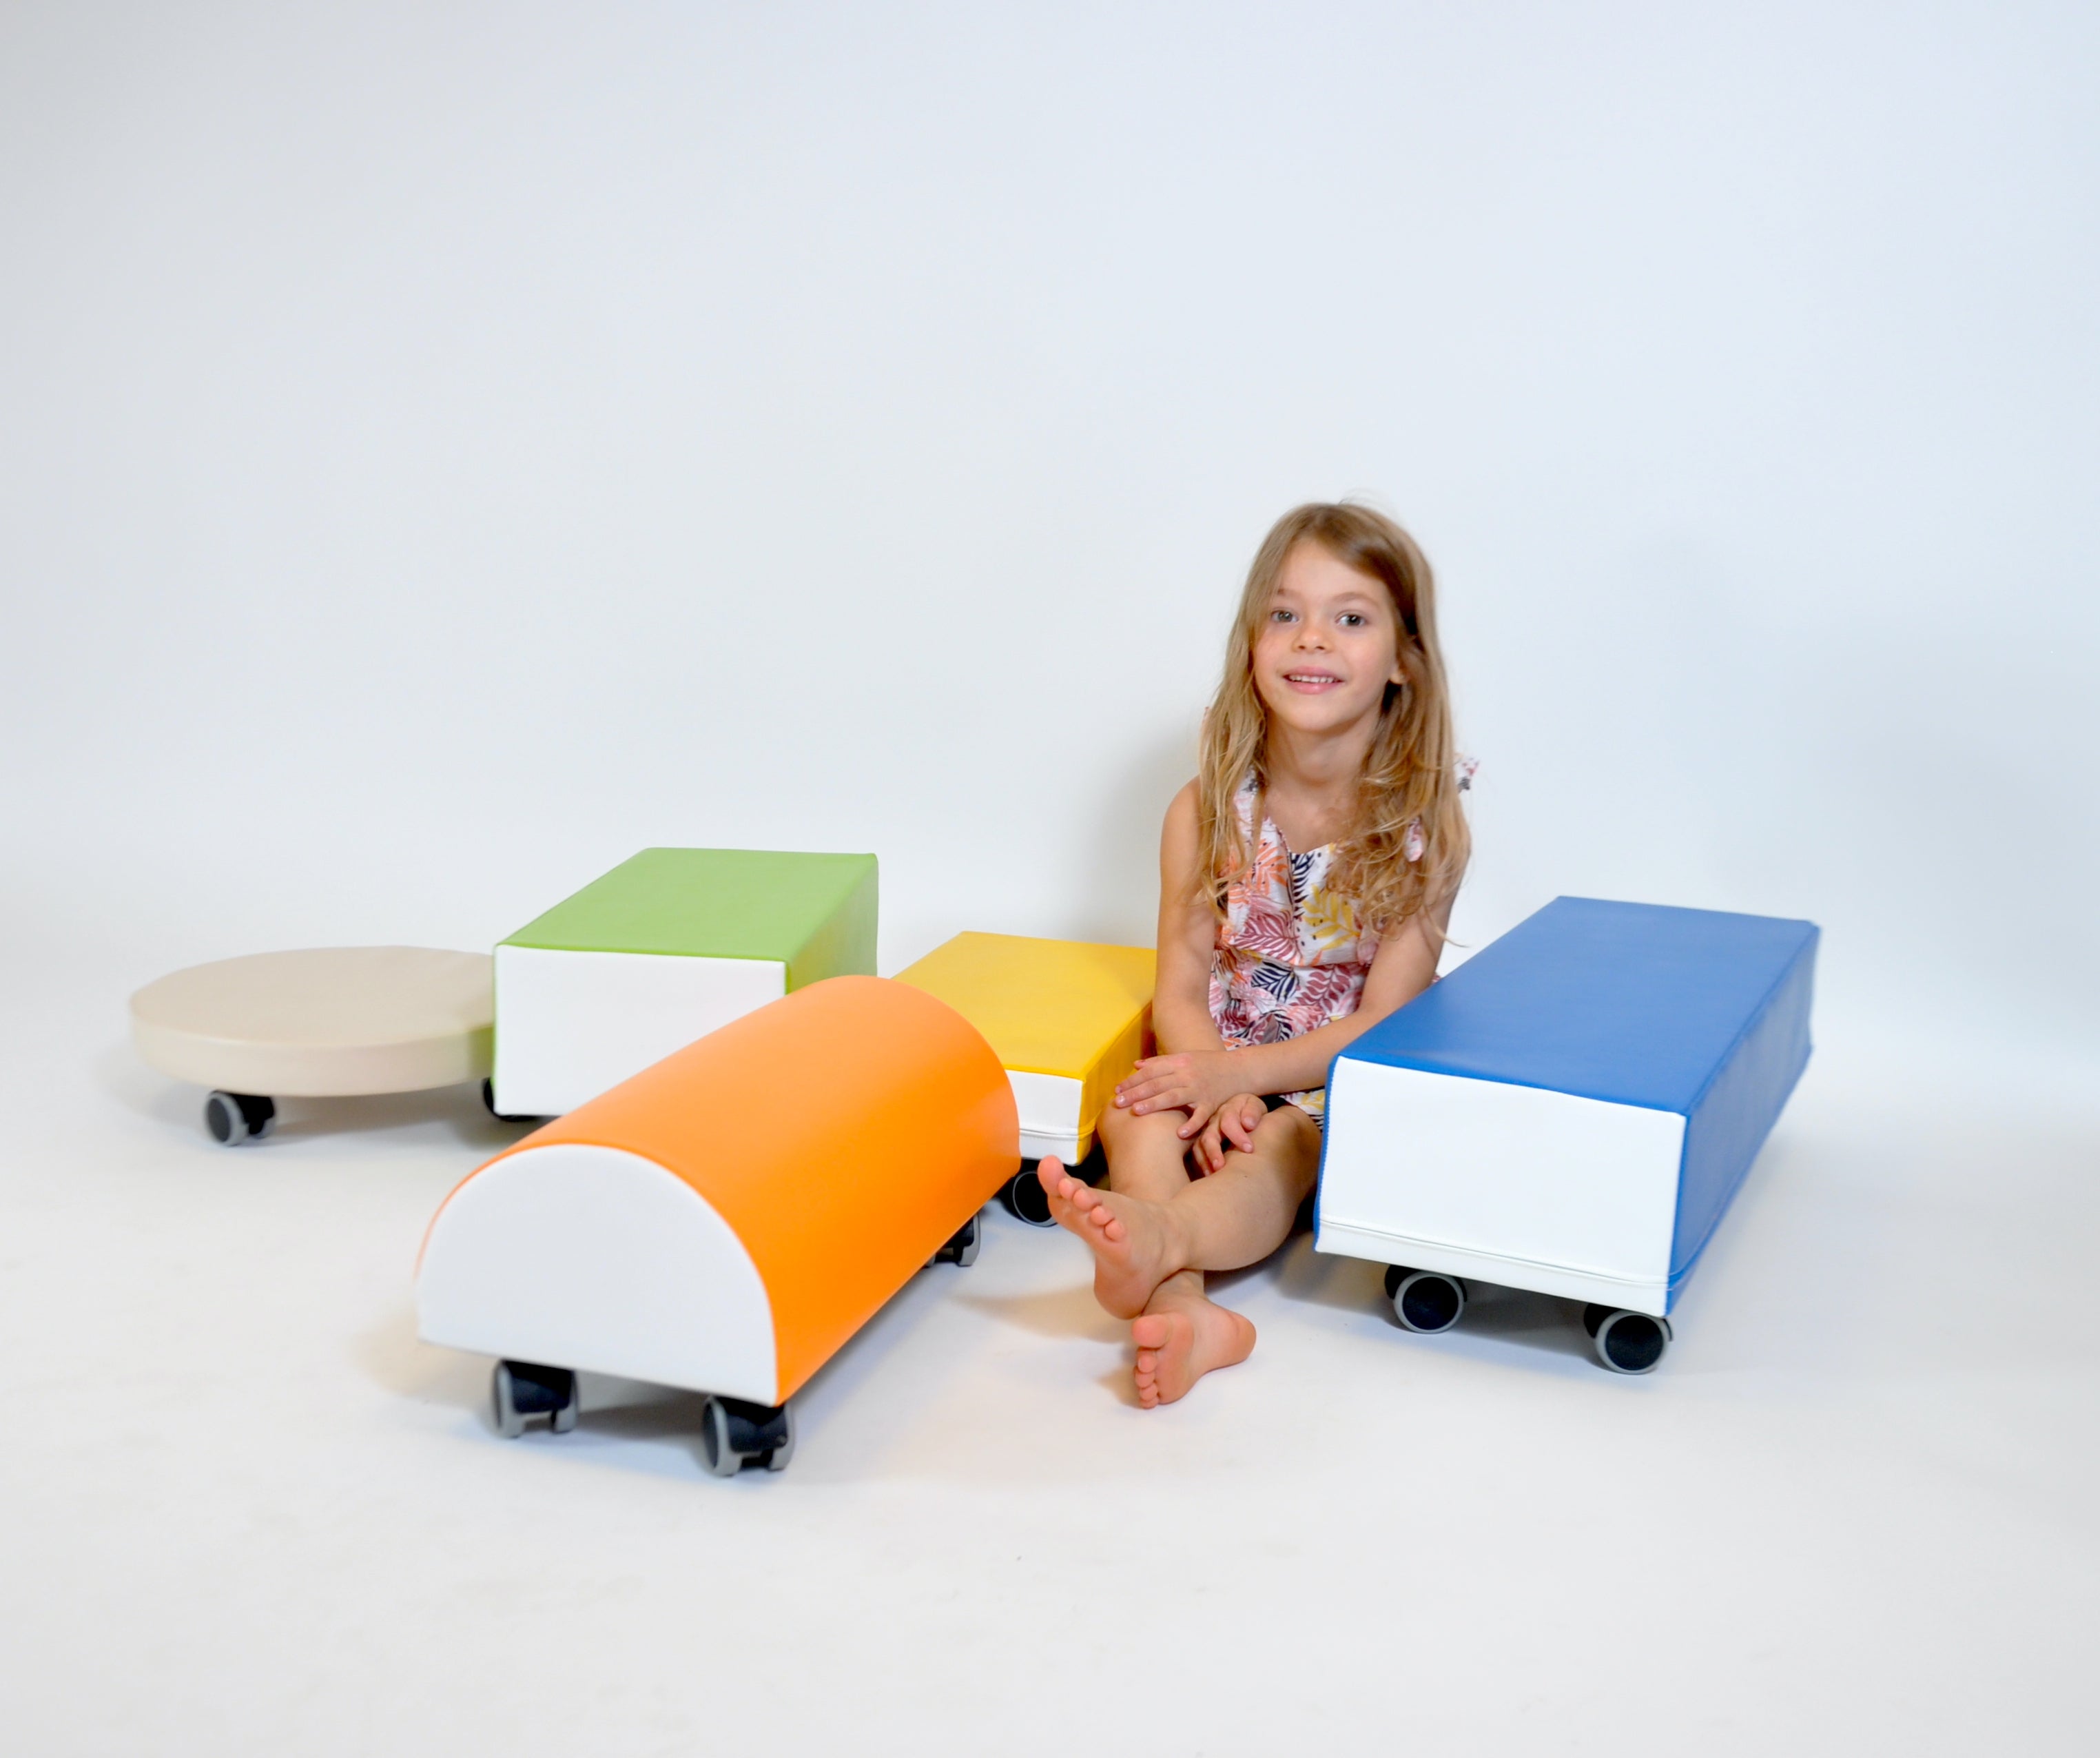 Soft Play Surfer Rider - Durable, Safe and Fun Play Riders for Kids 